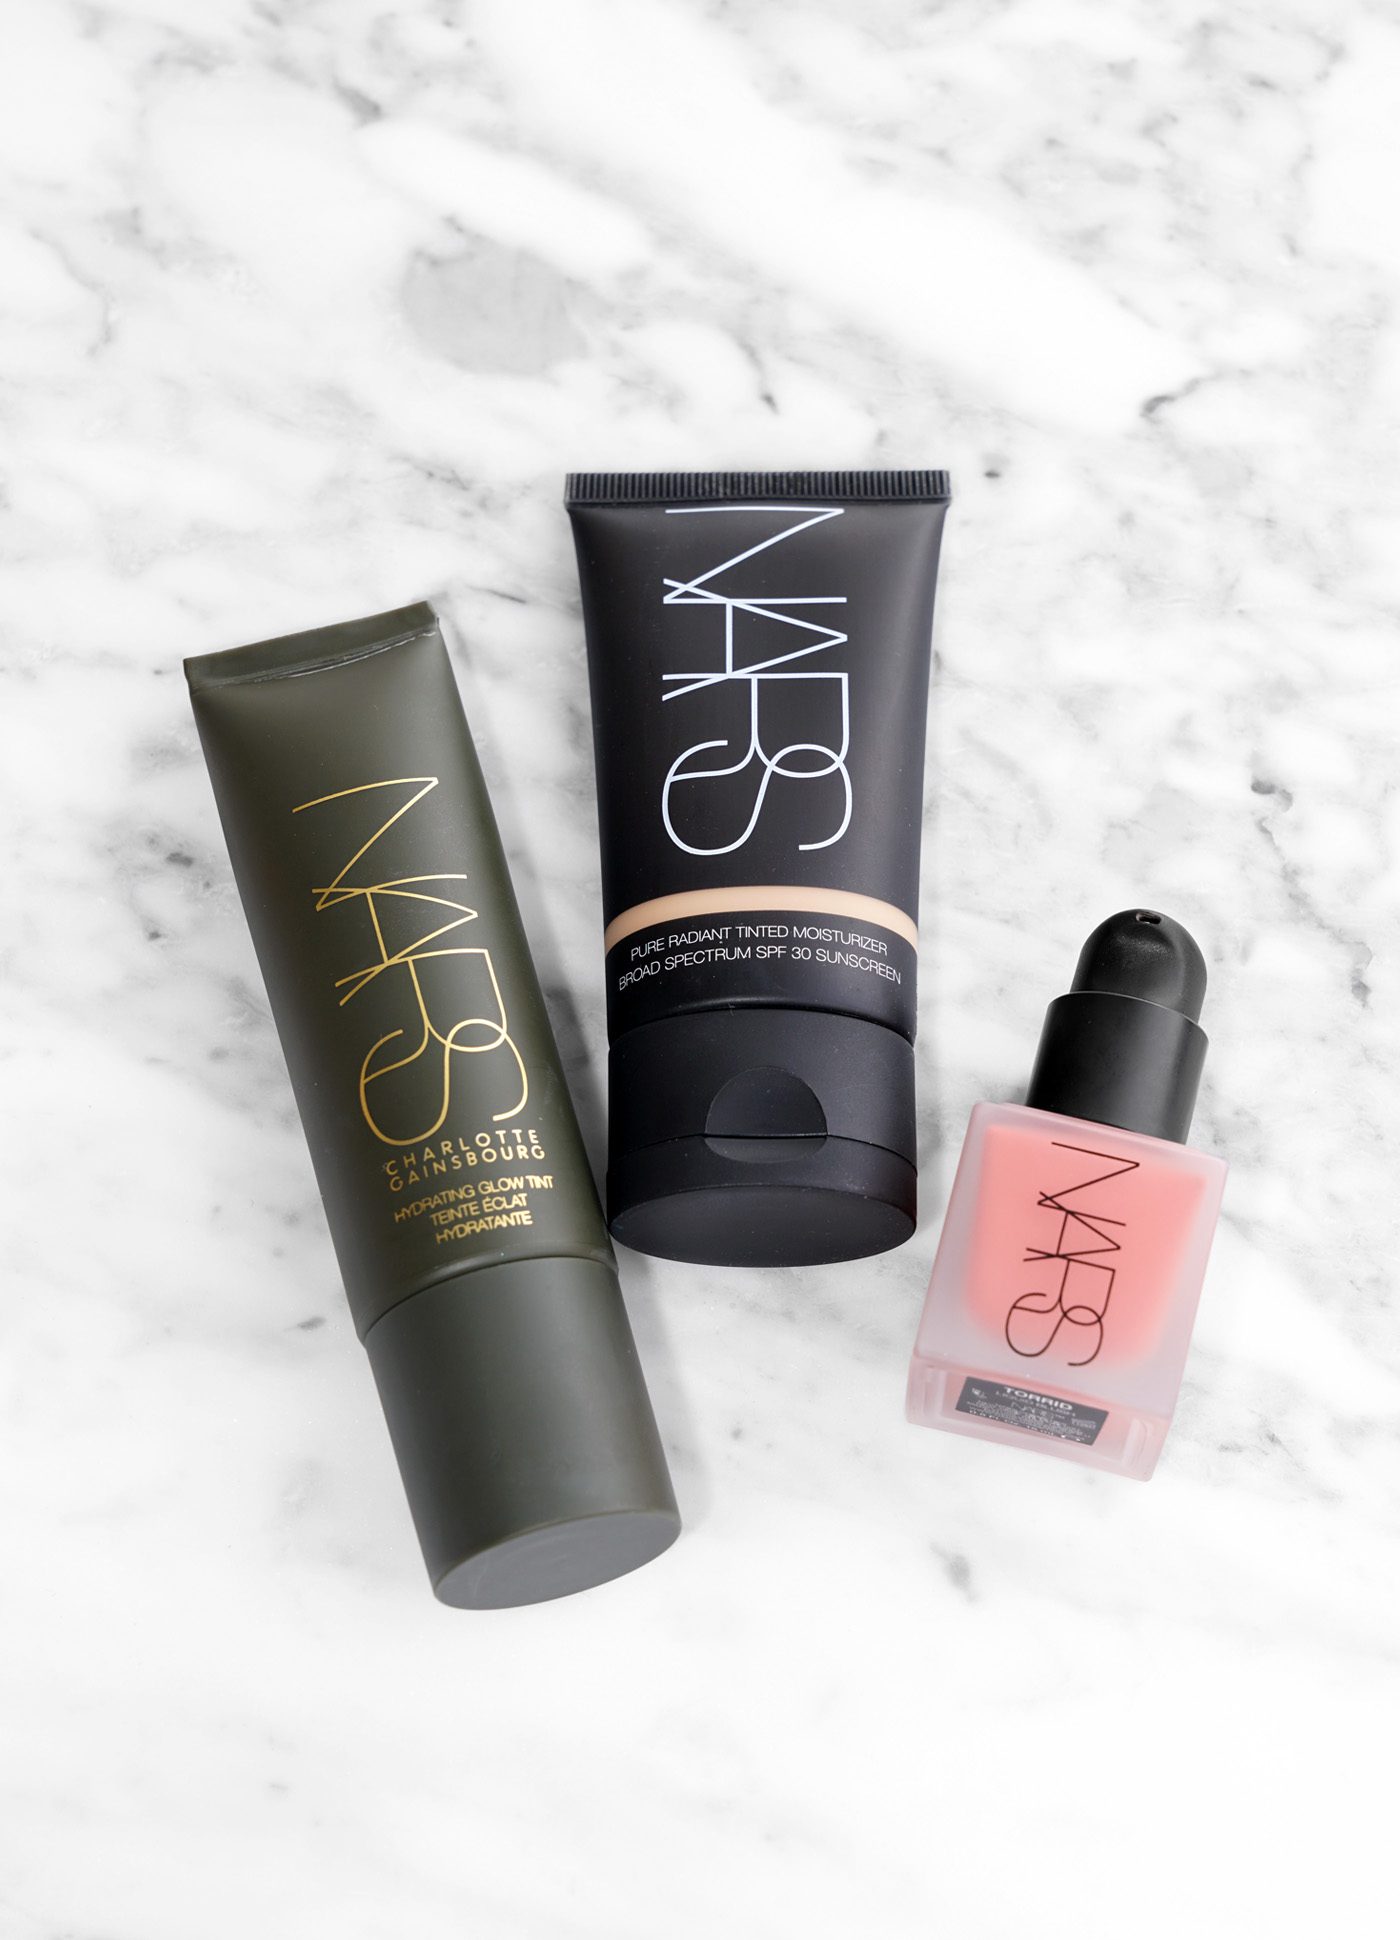 NARS Hydrating Glow Tint, Pure Radiant Tinted Moisturizer, Liquid Blush | The Beauty Look Book